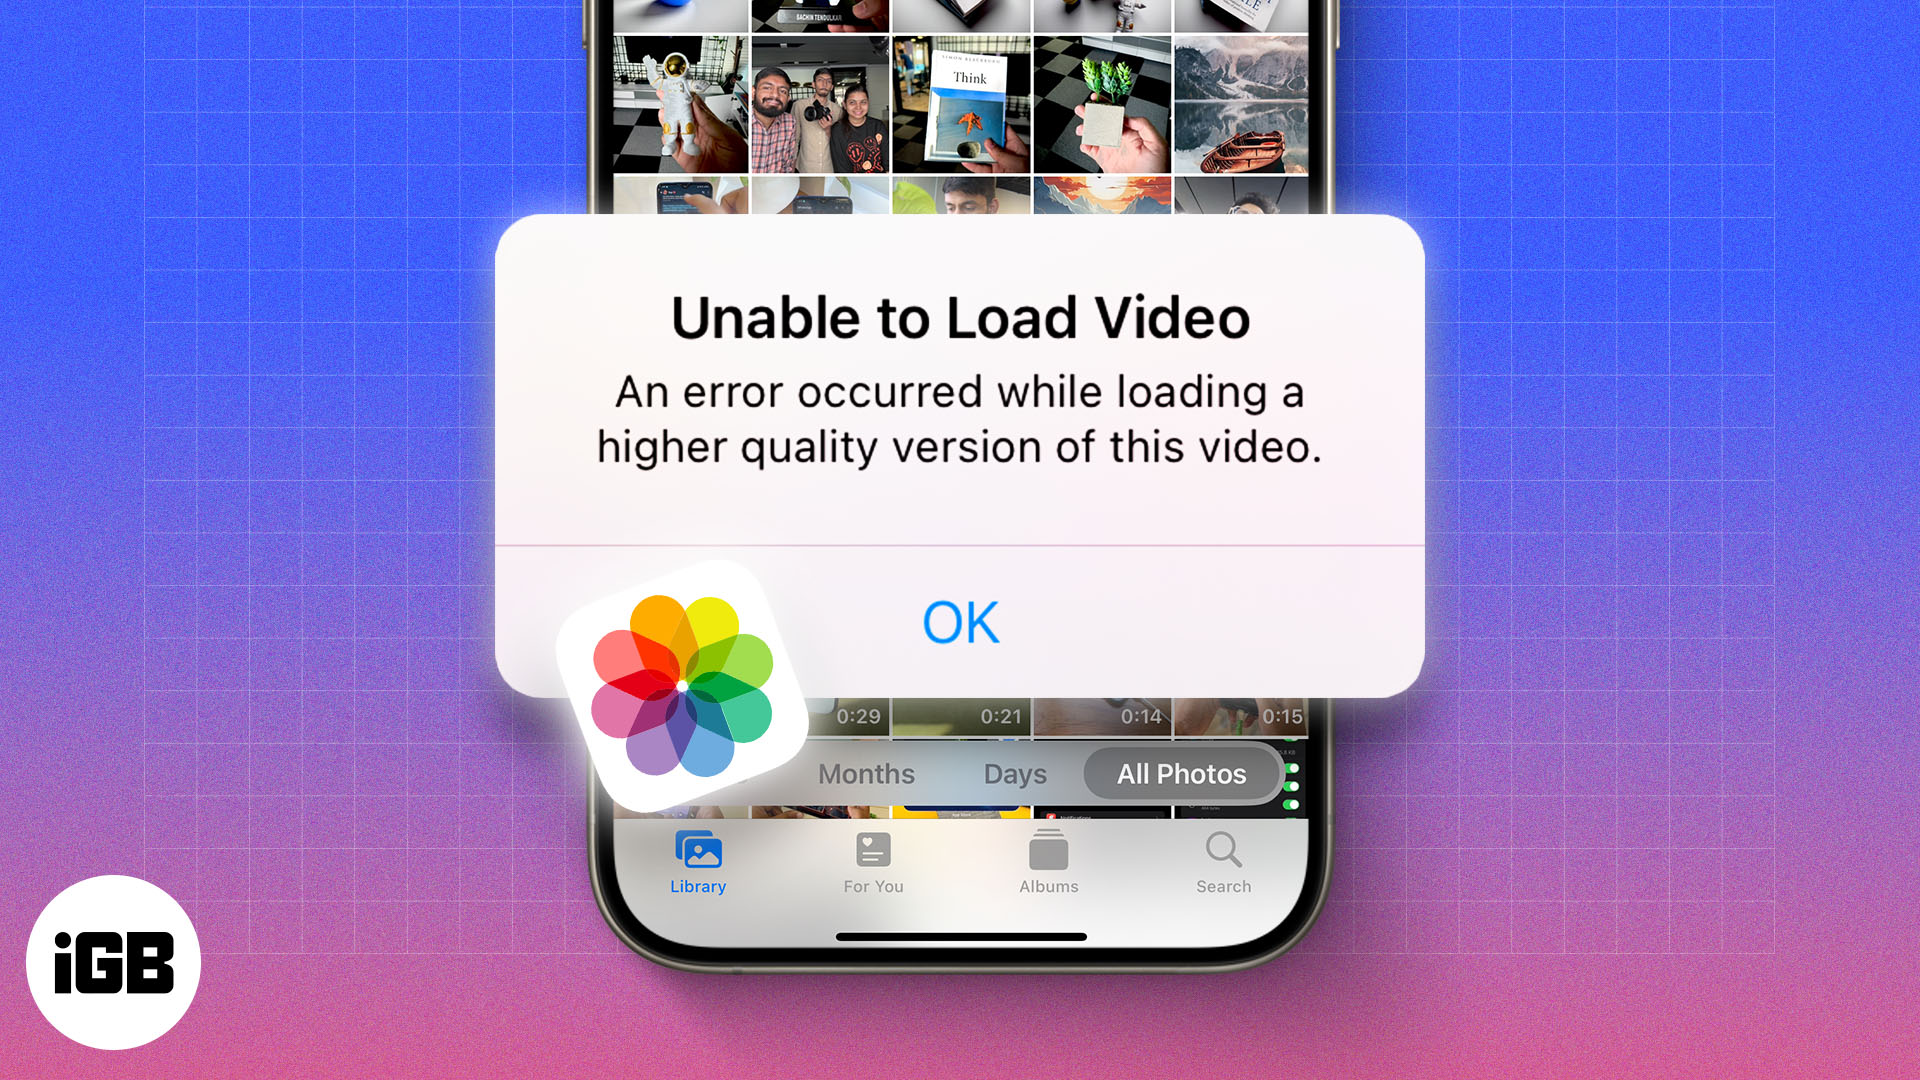 How to fix the “Unable to Load Photo or Video” error on iPhone